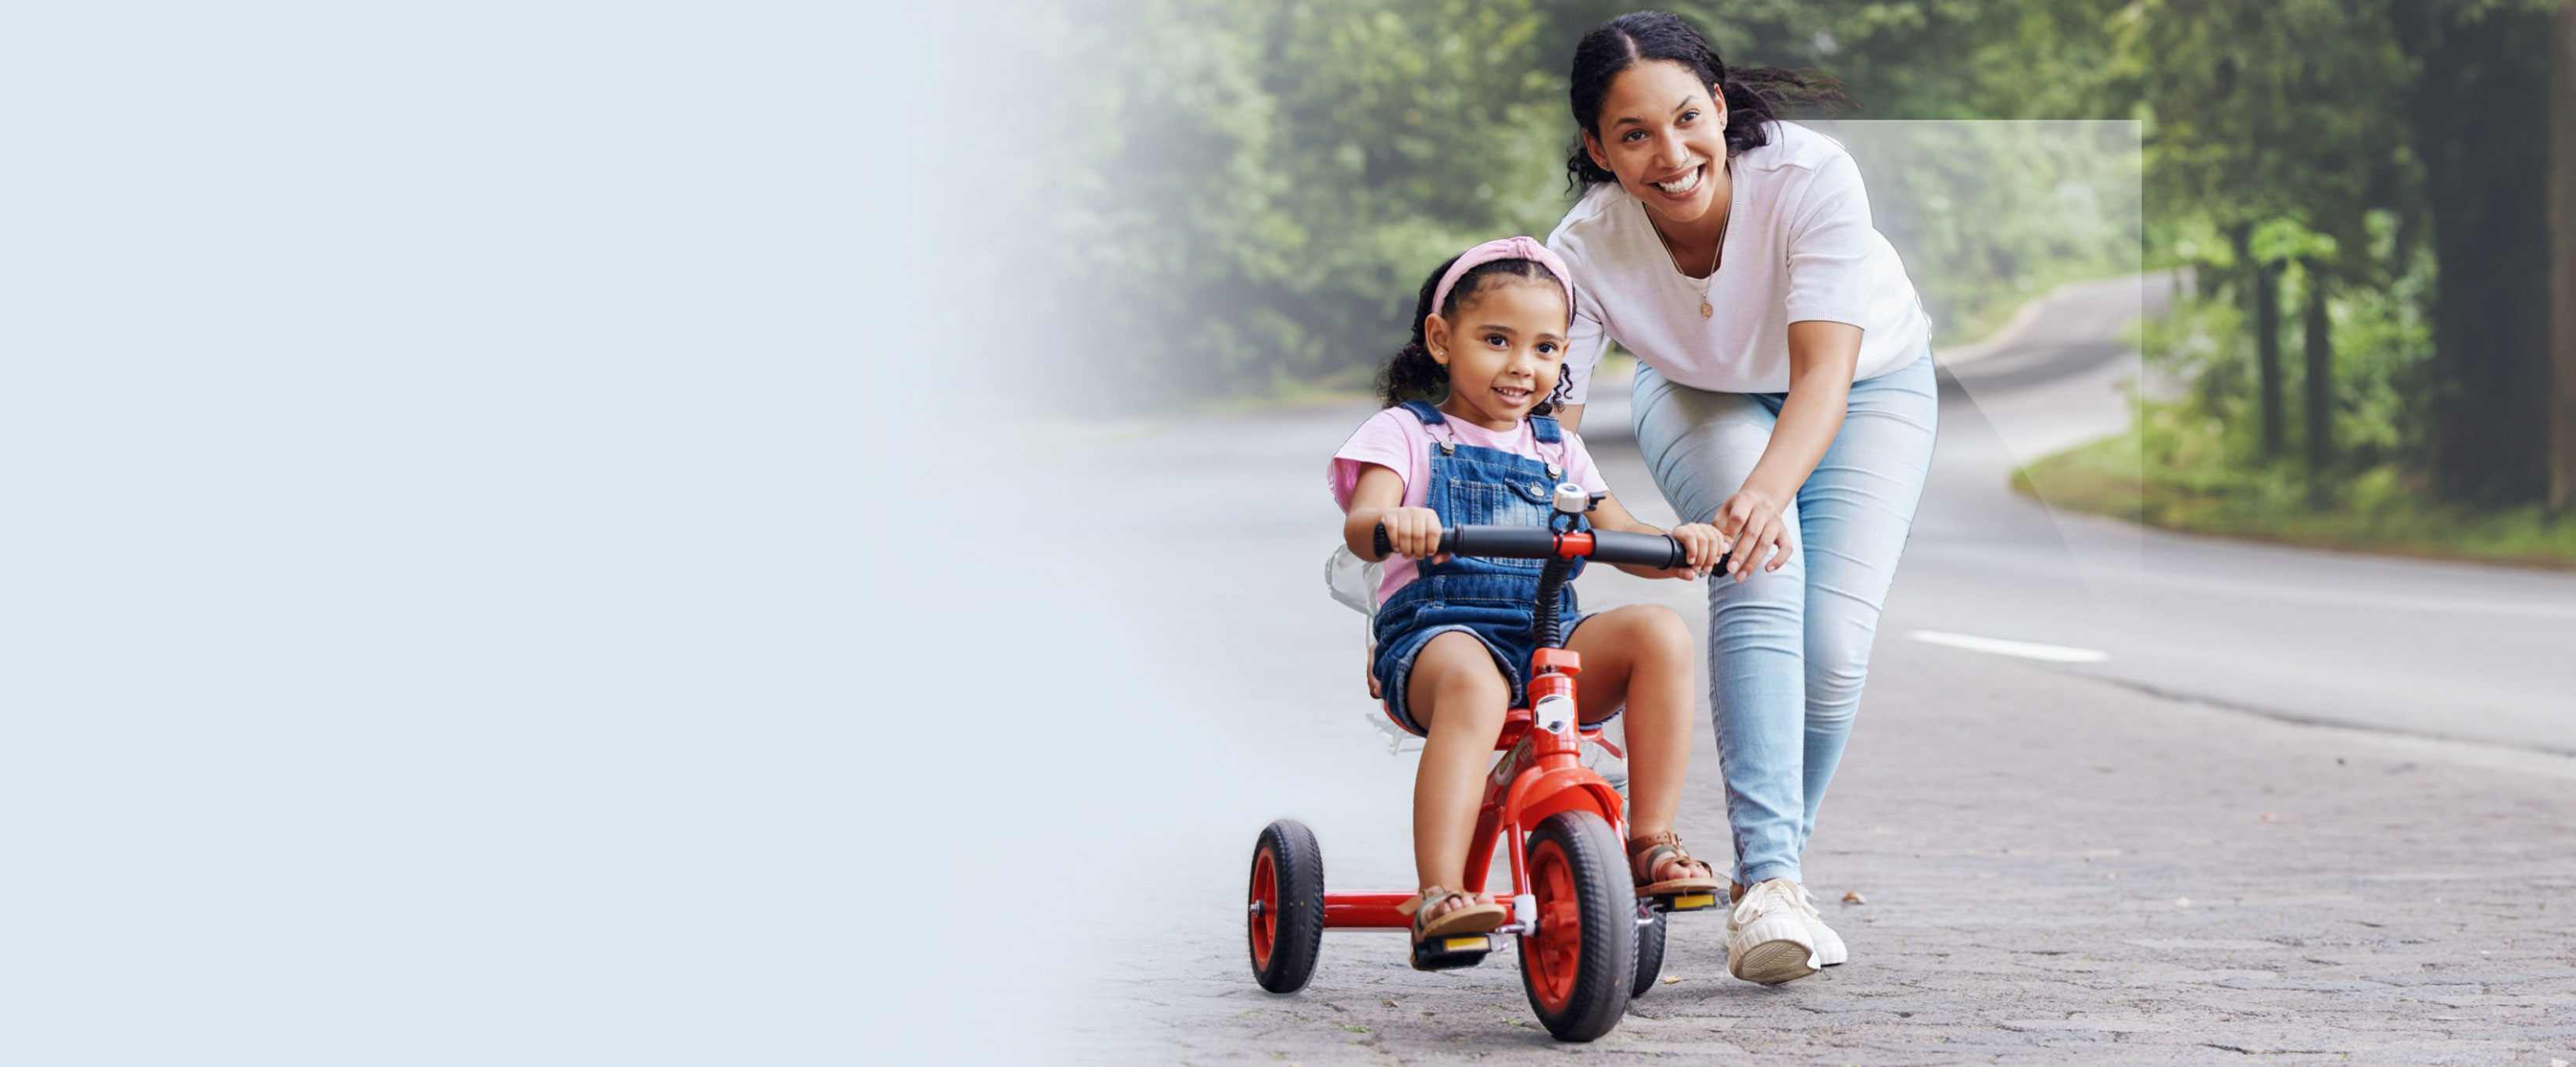 A happy scene of a woman pushing a young child on a tricycle outdoors.